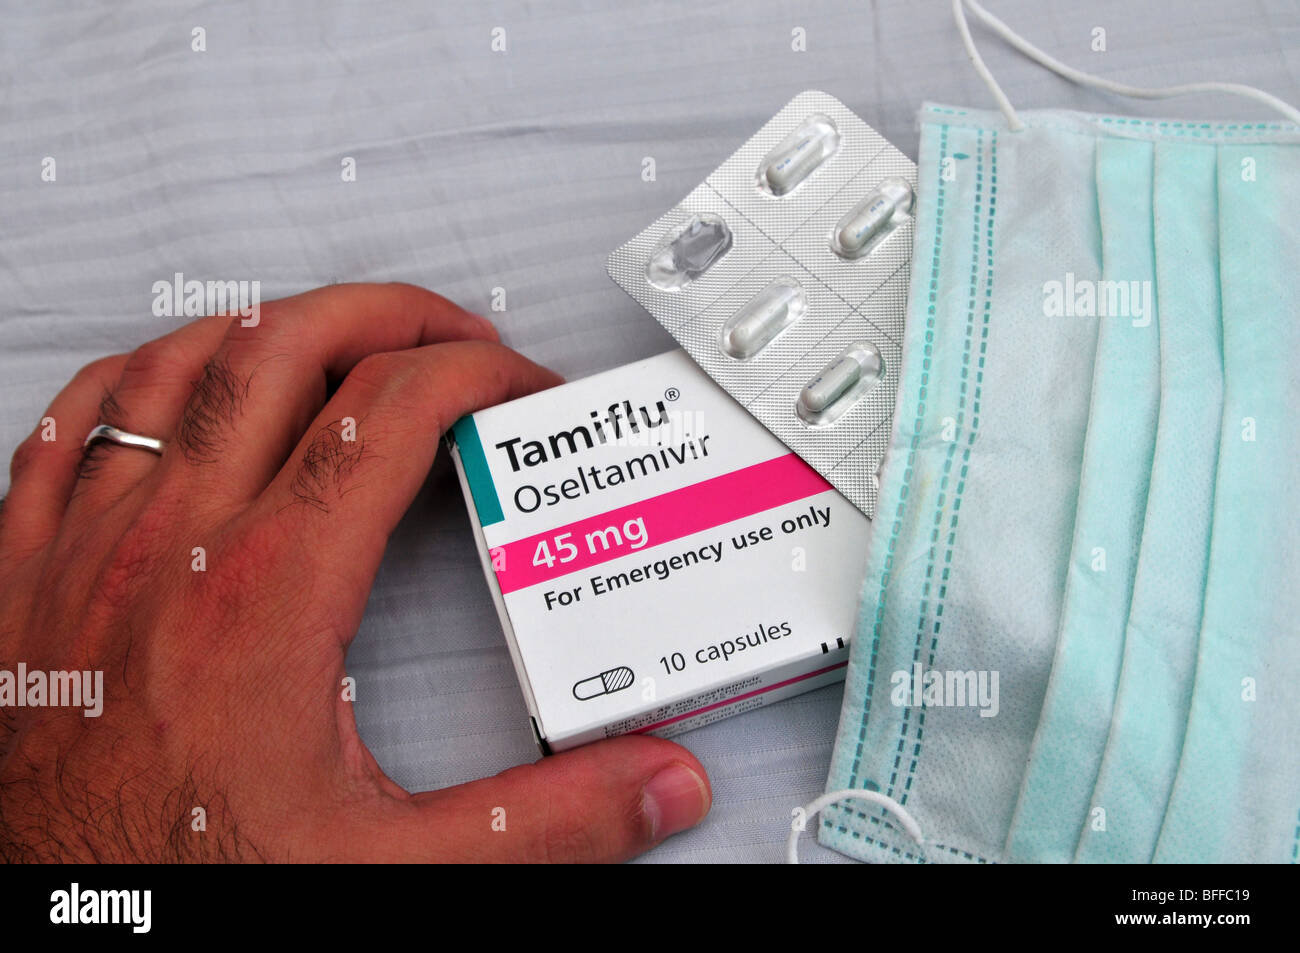 A medical face mask and a pack of Tamiflu tablets agaist Swine flu, October 30, 2009. Stock Photo